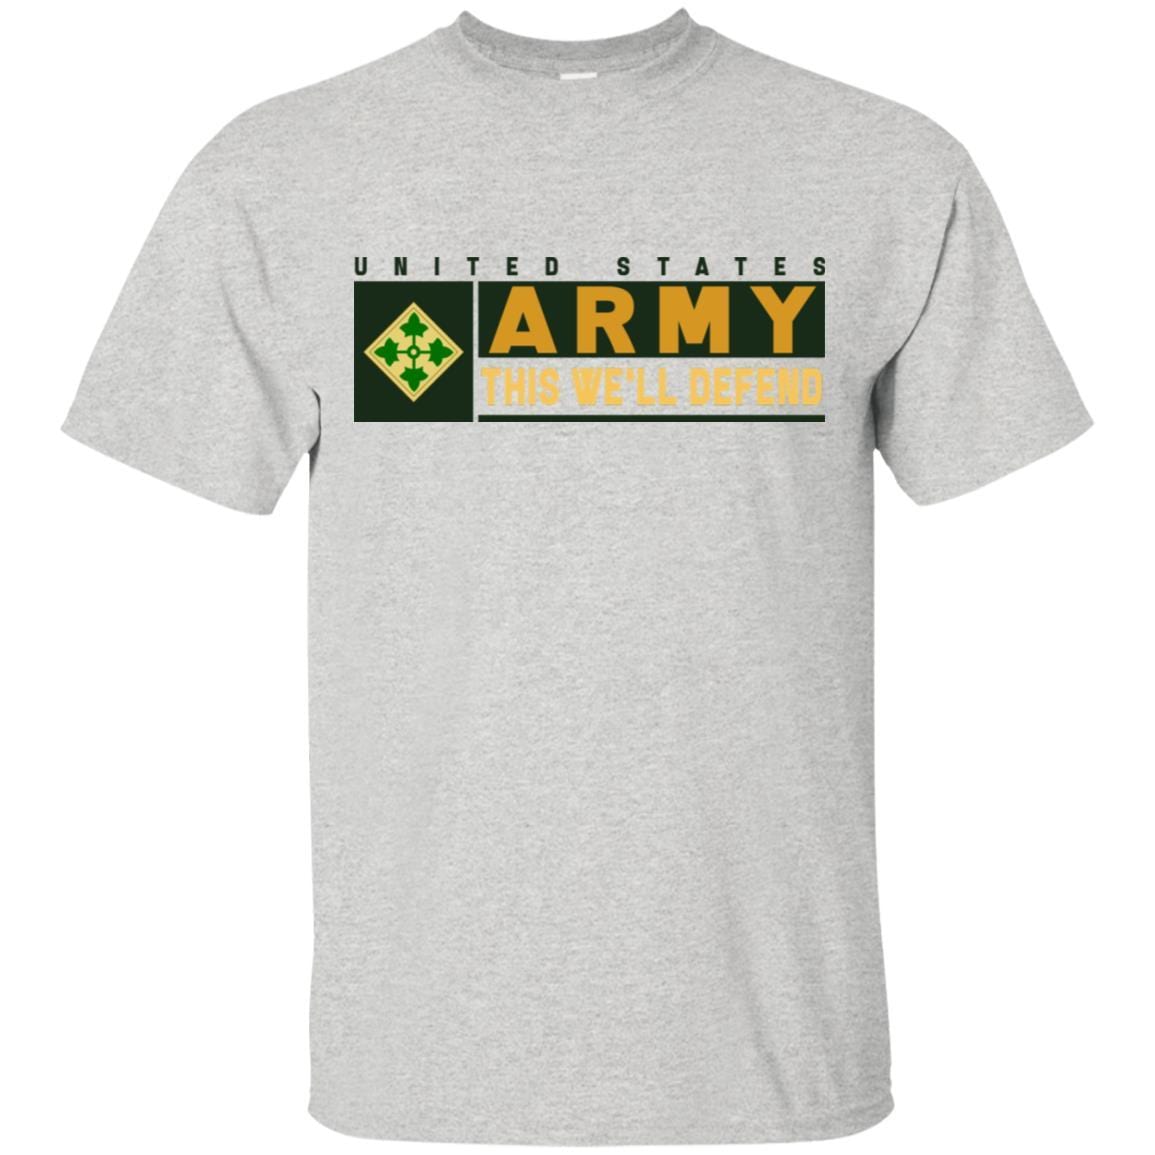 US Army 4th Infantry Division- This We'll Defend T-Shirt On Front For Men-TShirt-Army-Veterans Nation